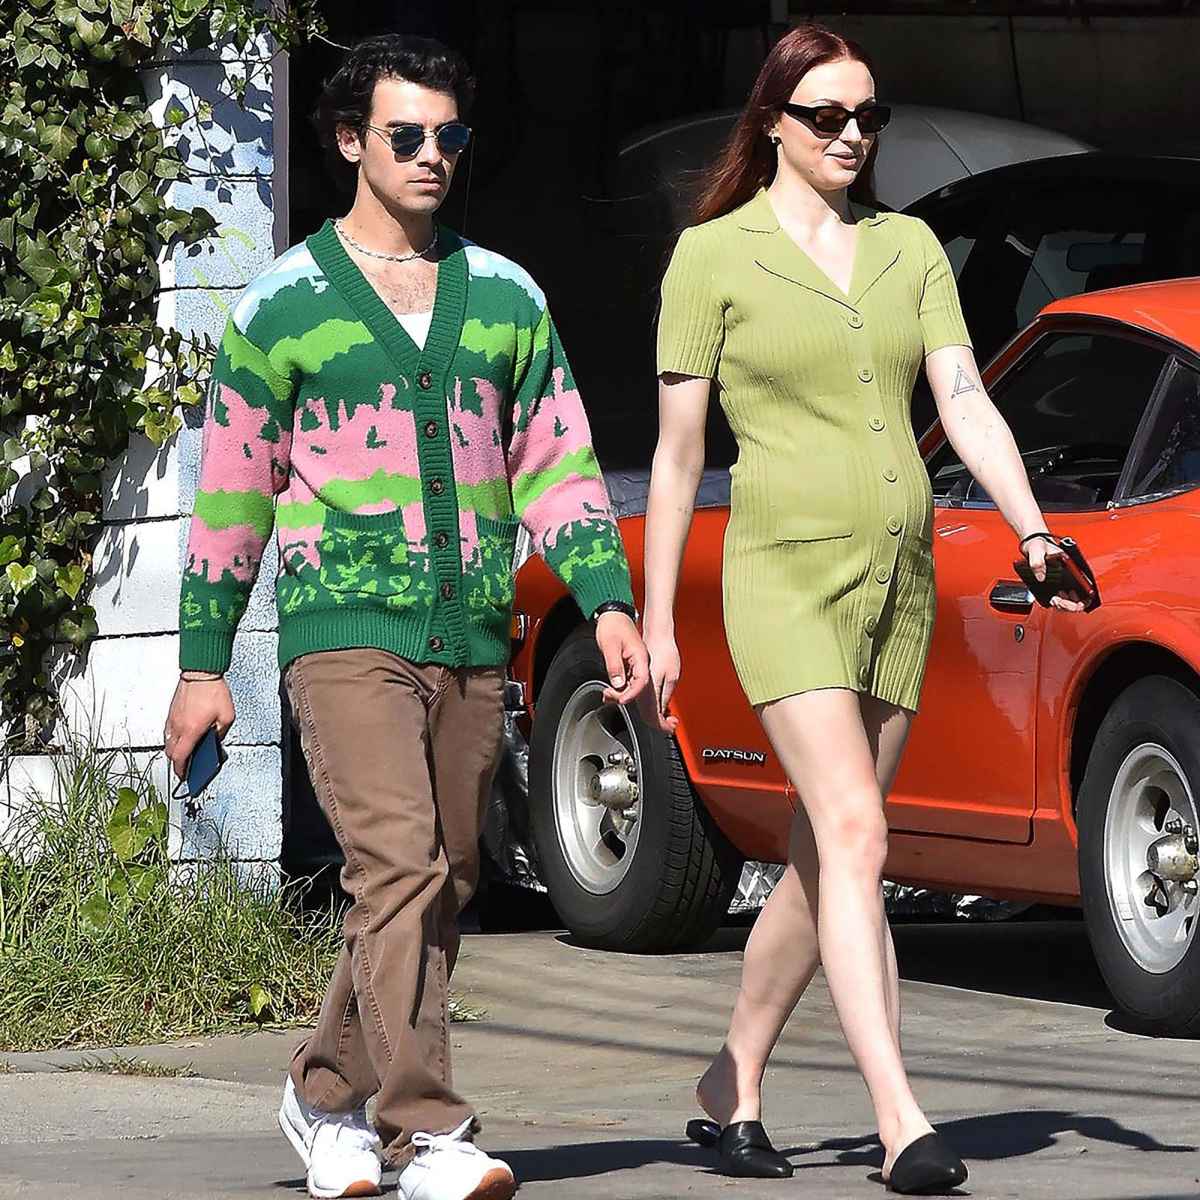 Sophie Turner is pregnant, expecting first child with Joe Jonas, sources say